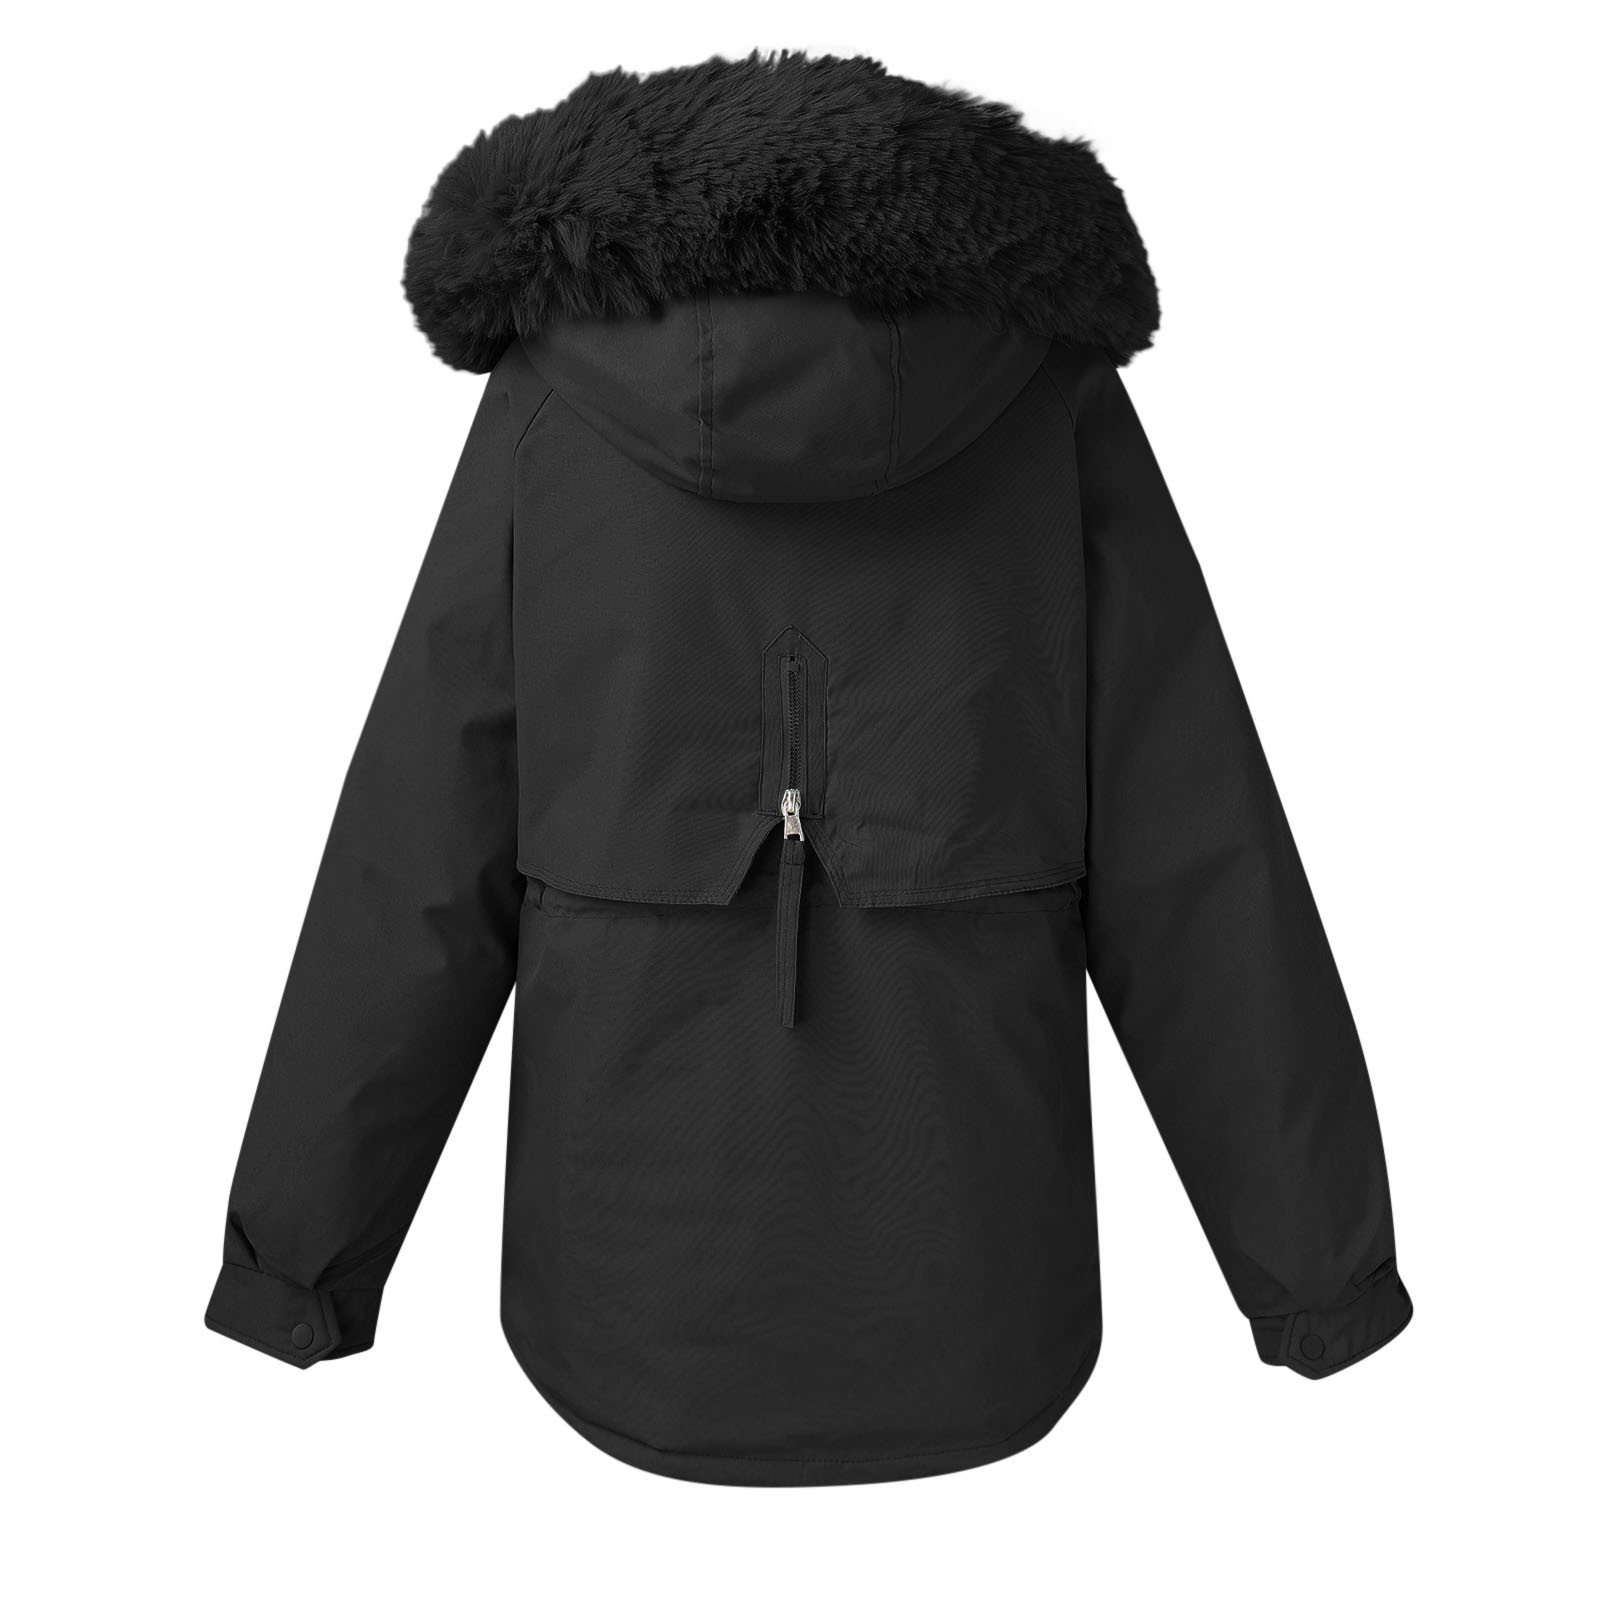 Short Work Jackets for Women Jackets for Woman Women Winter Coat Lapel Collar Long Sleeve Jacket Vintage Thicken Coat Jacket Warm Hooded Thick Padded Outerwear Big Impossibly Light Jacket - image 4 of 4